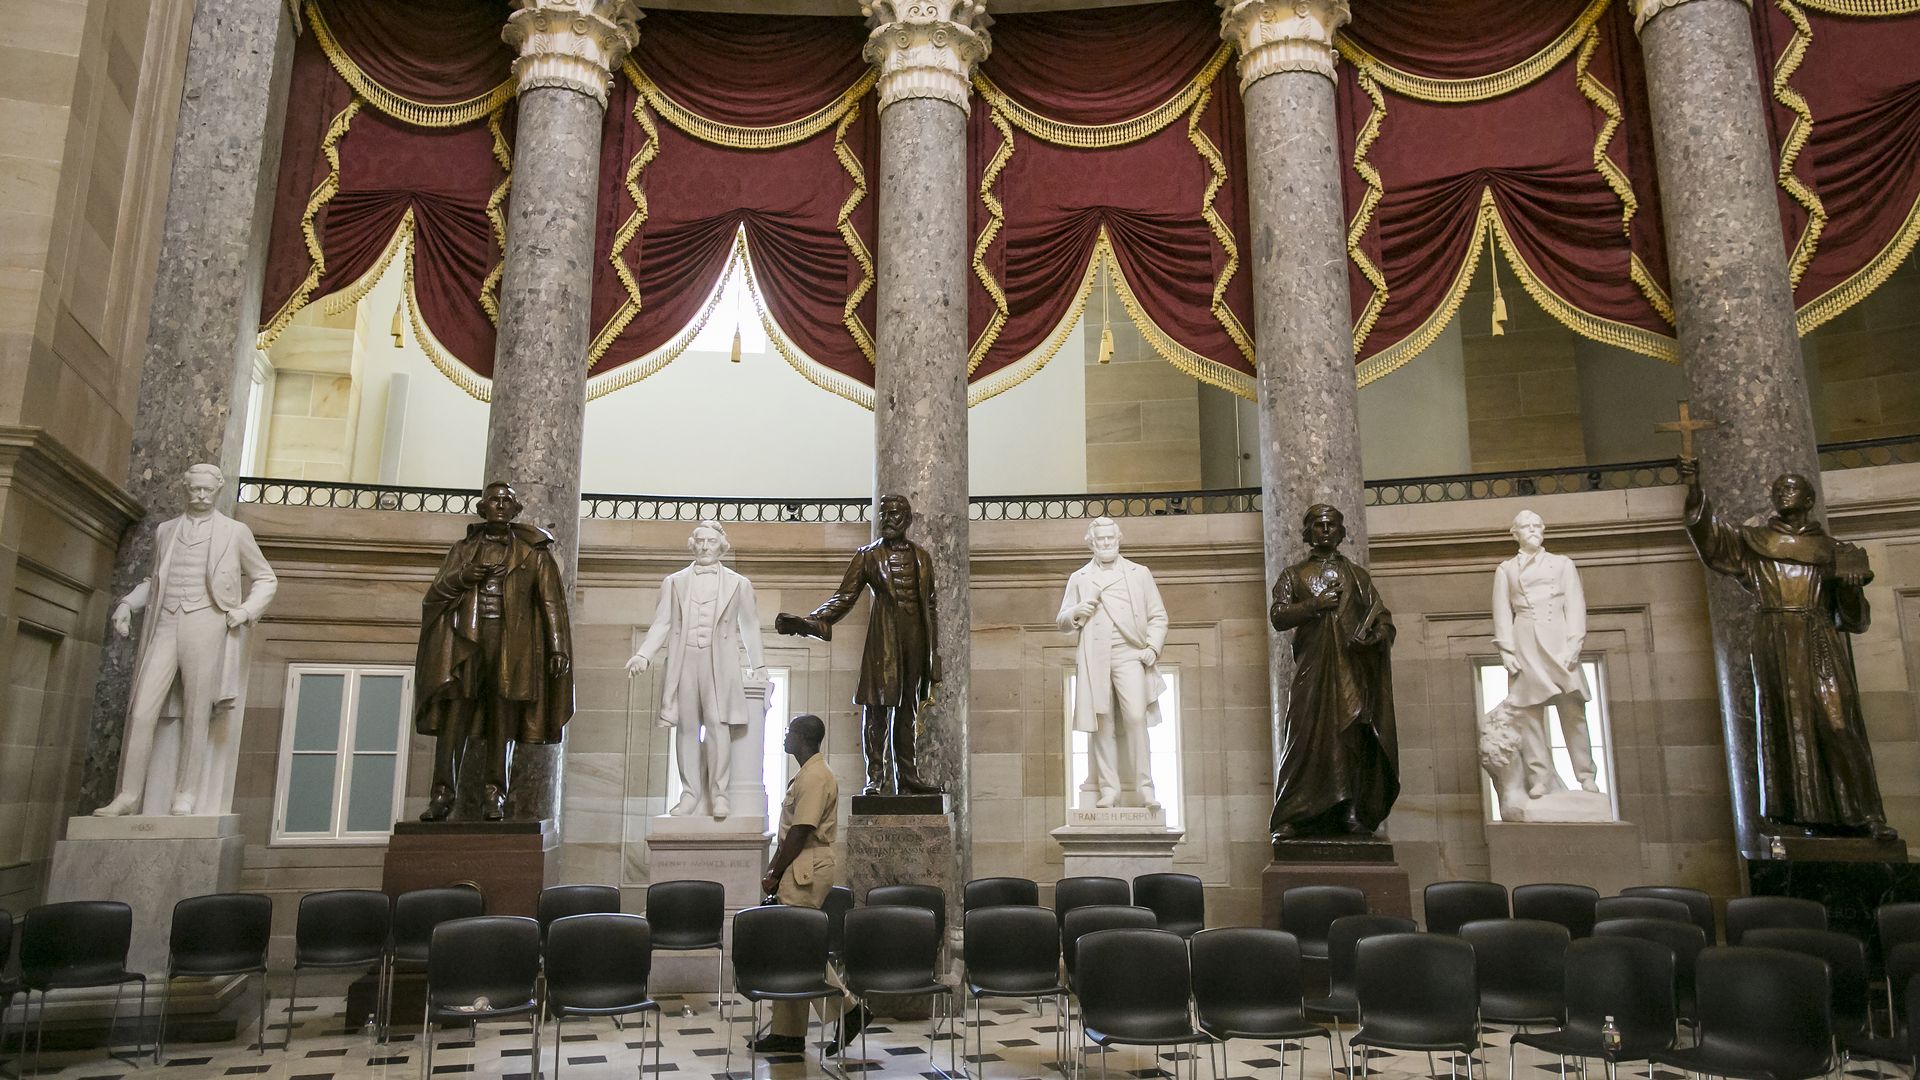 Picture of statues in the National Statuary Hall collection